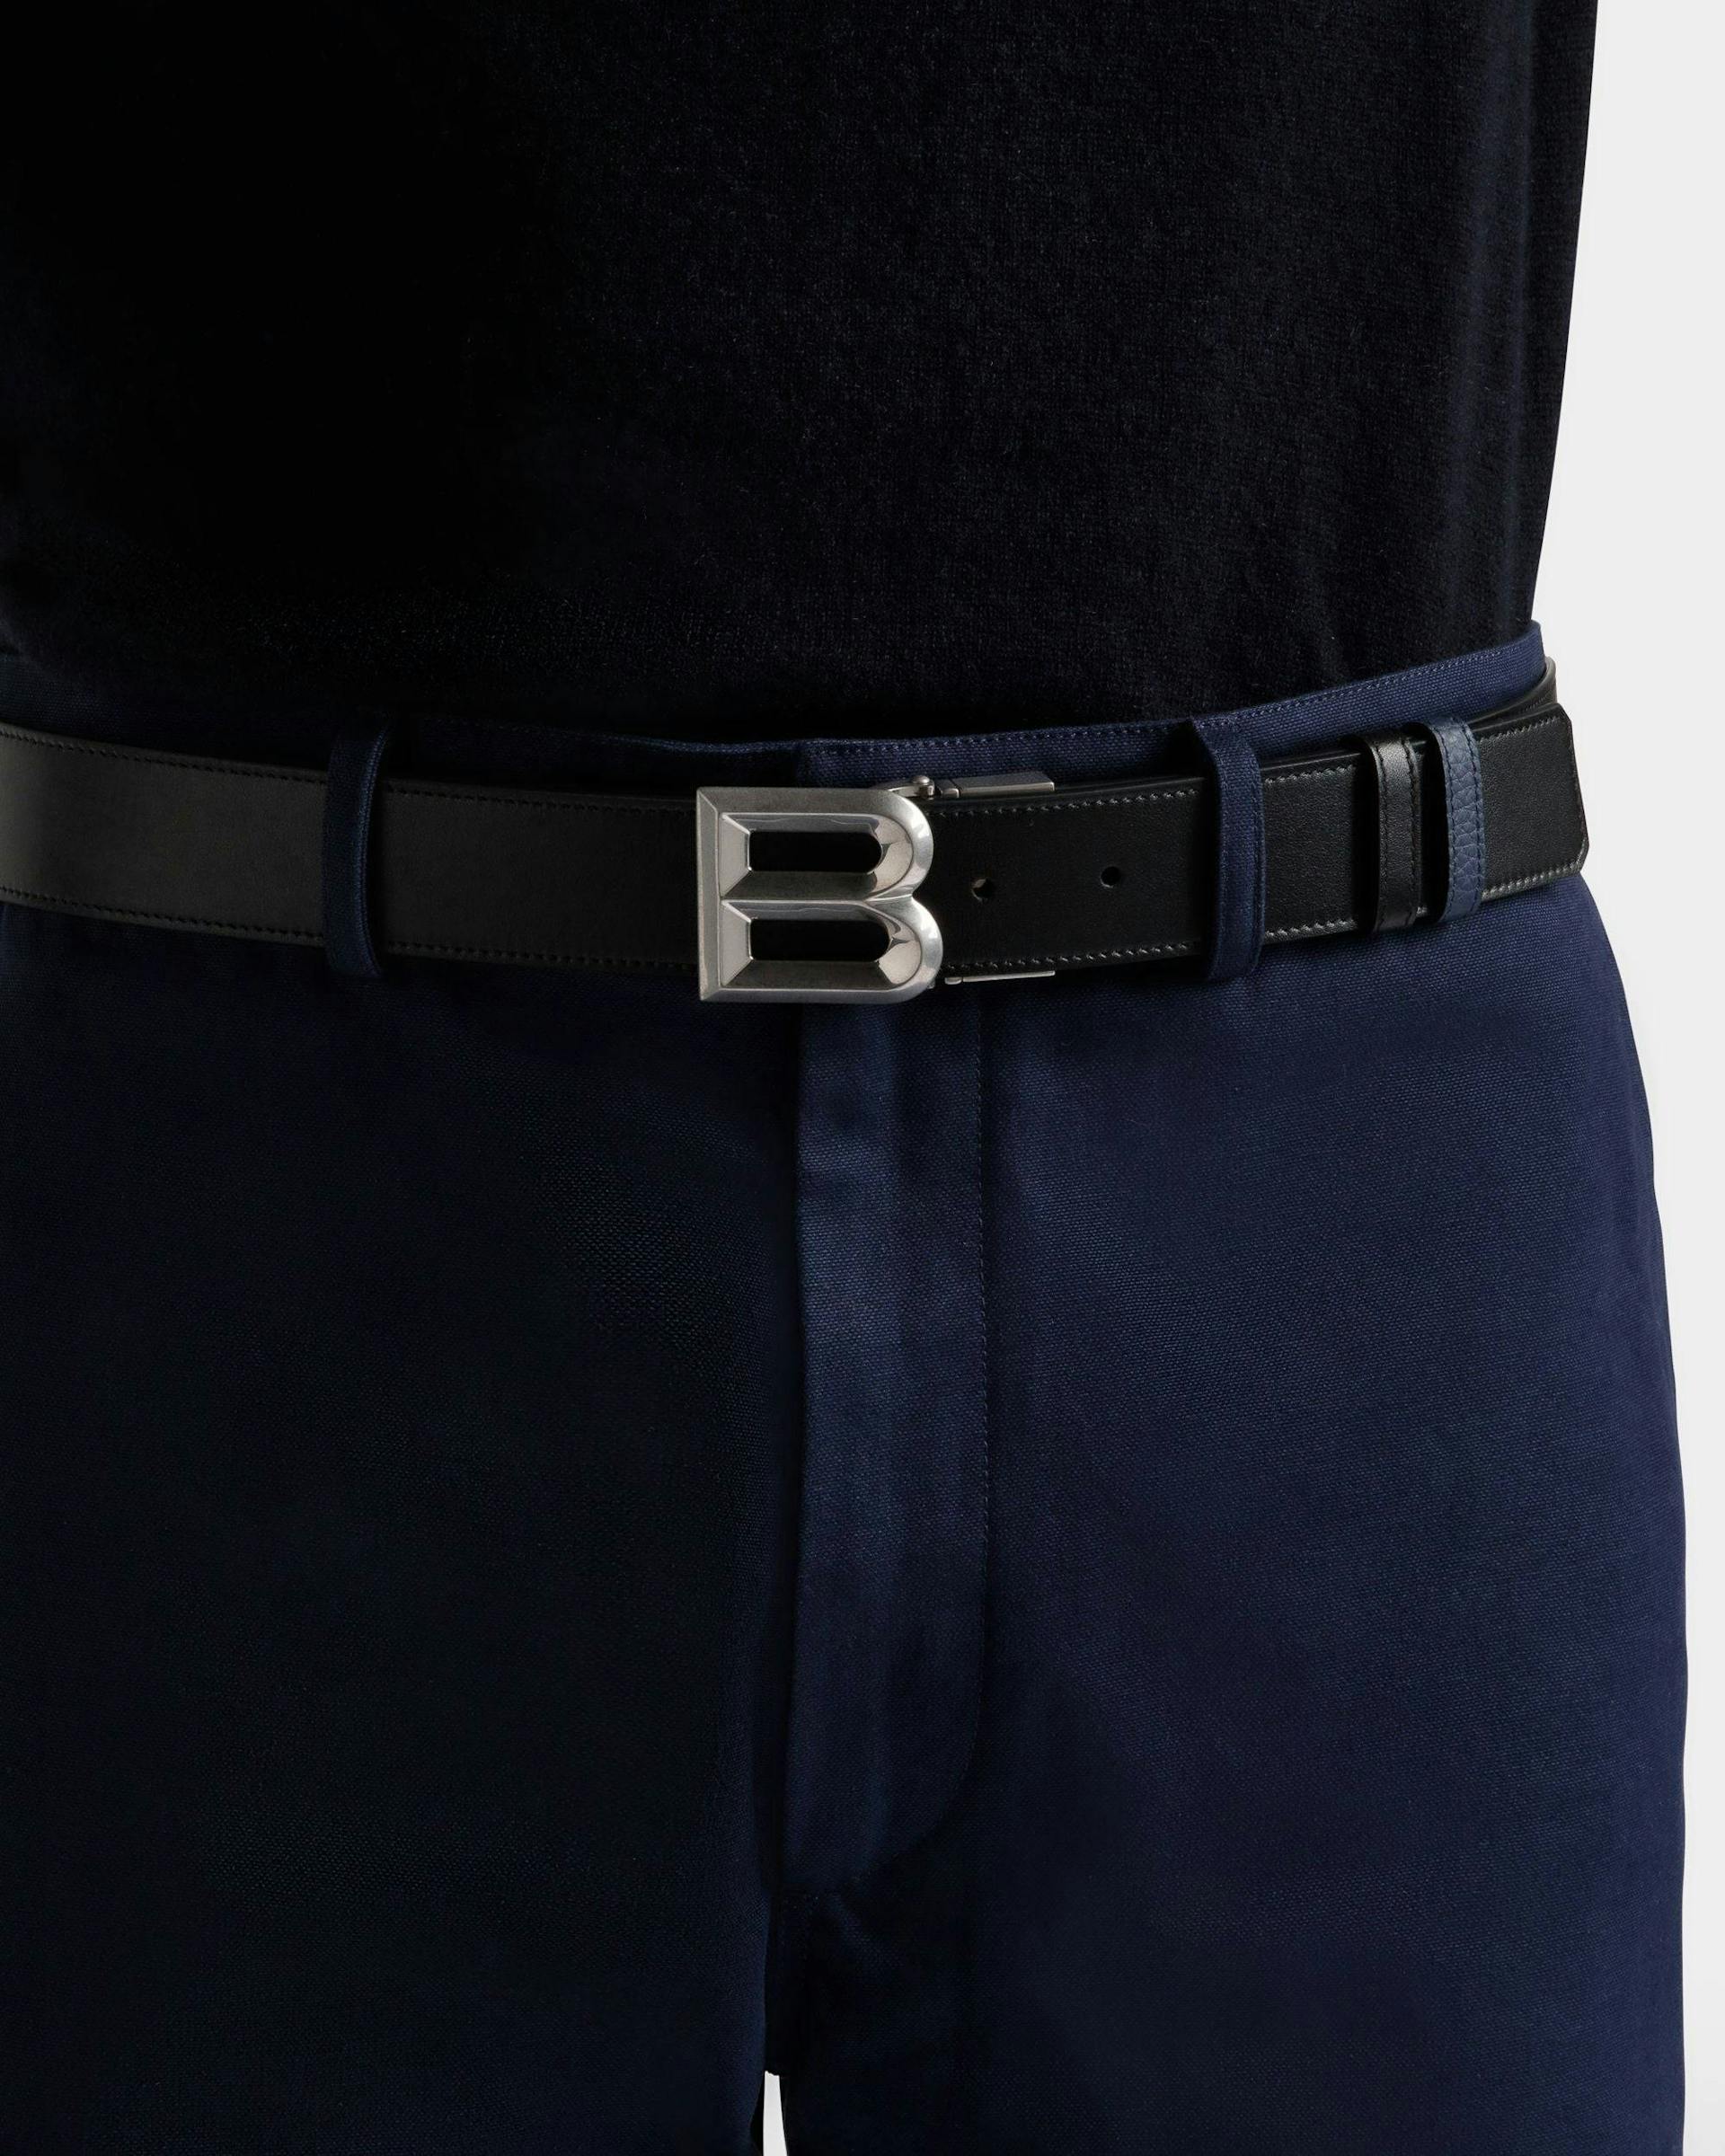 B Bold 35mm | Men's Reversible And Adjustable Belt in Black And Marine ...